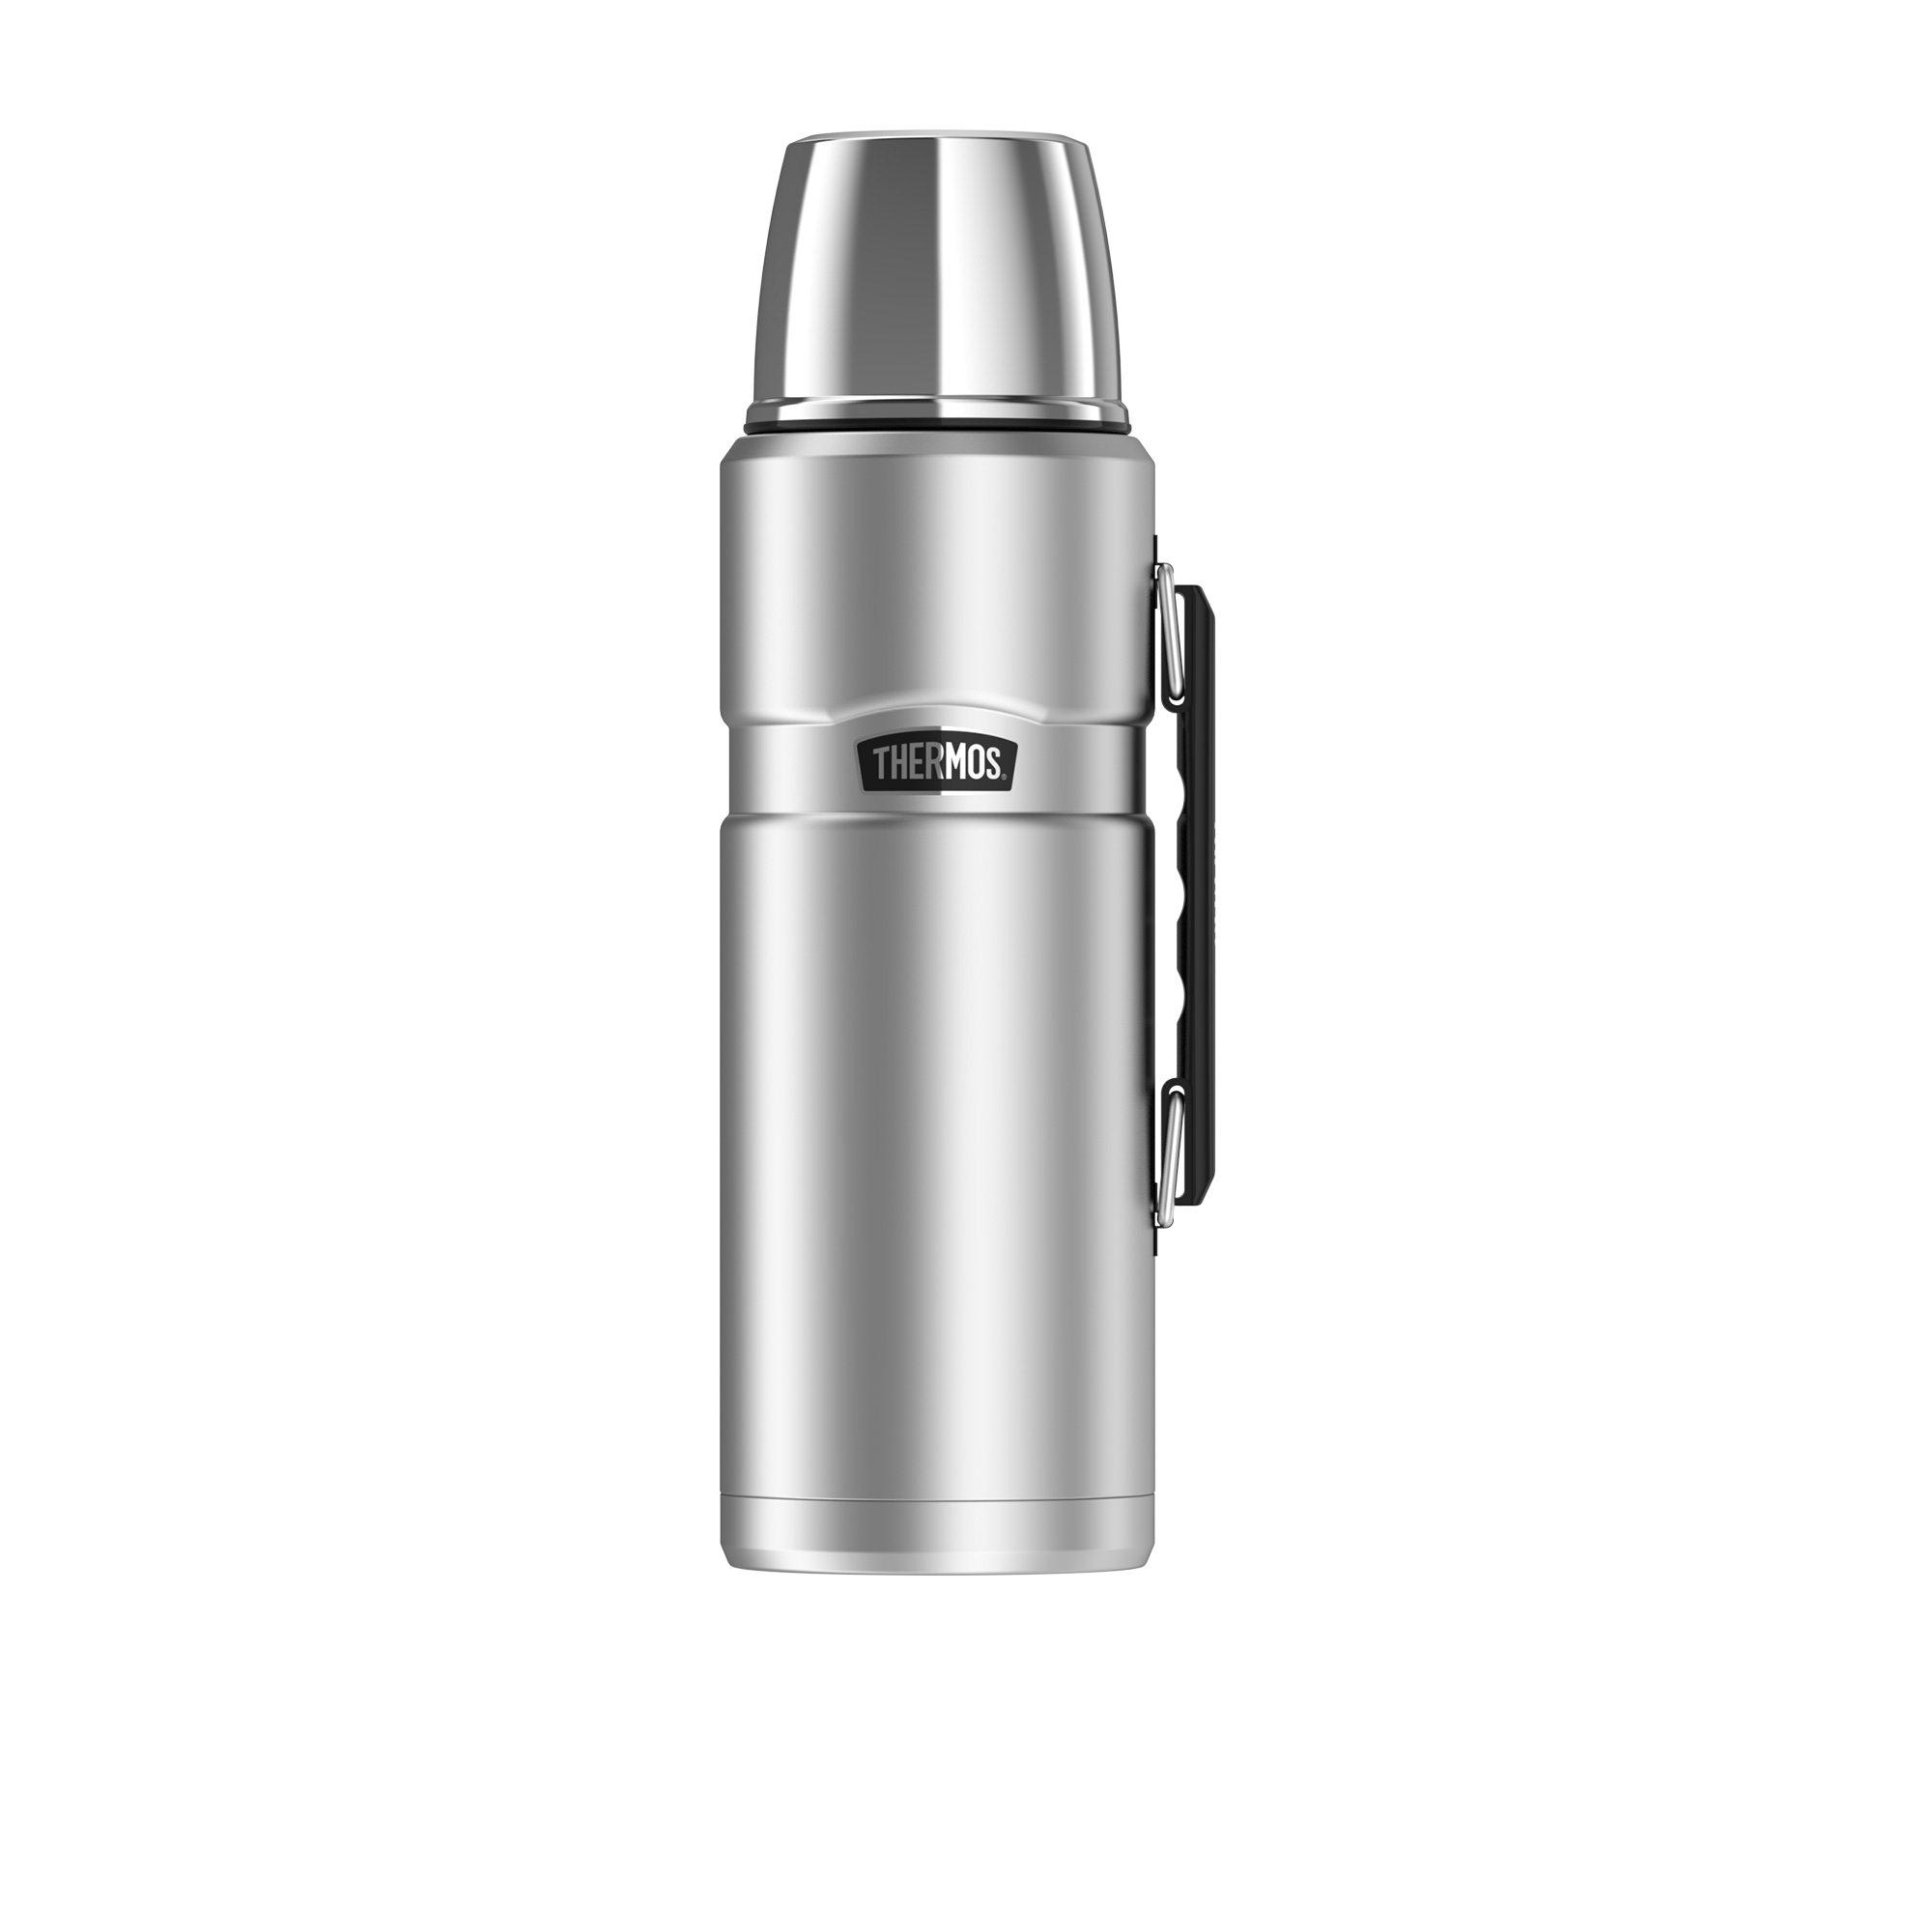 Thermos Stainless King Insulated Flask 2L Stainless Steel Image 1